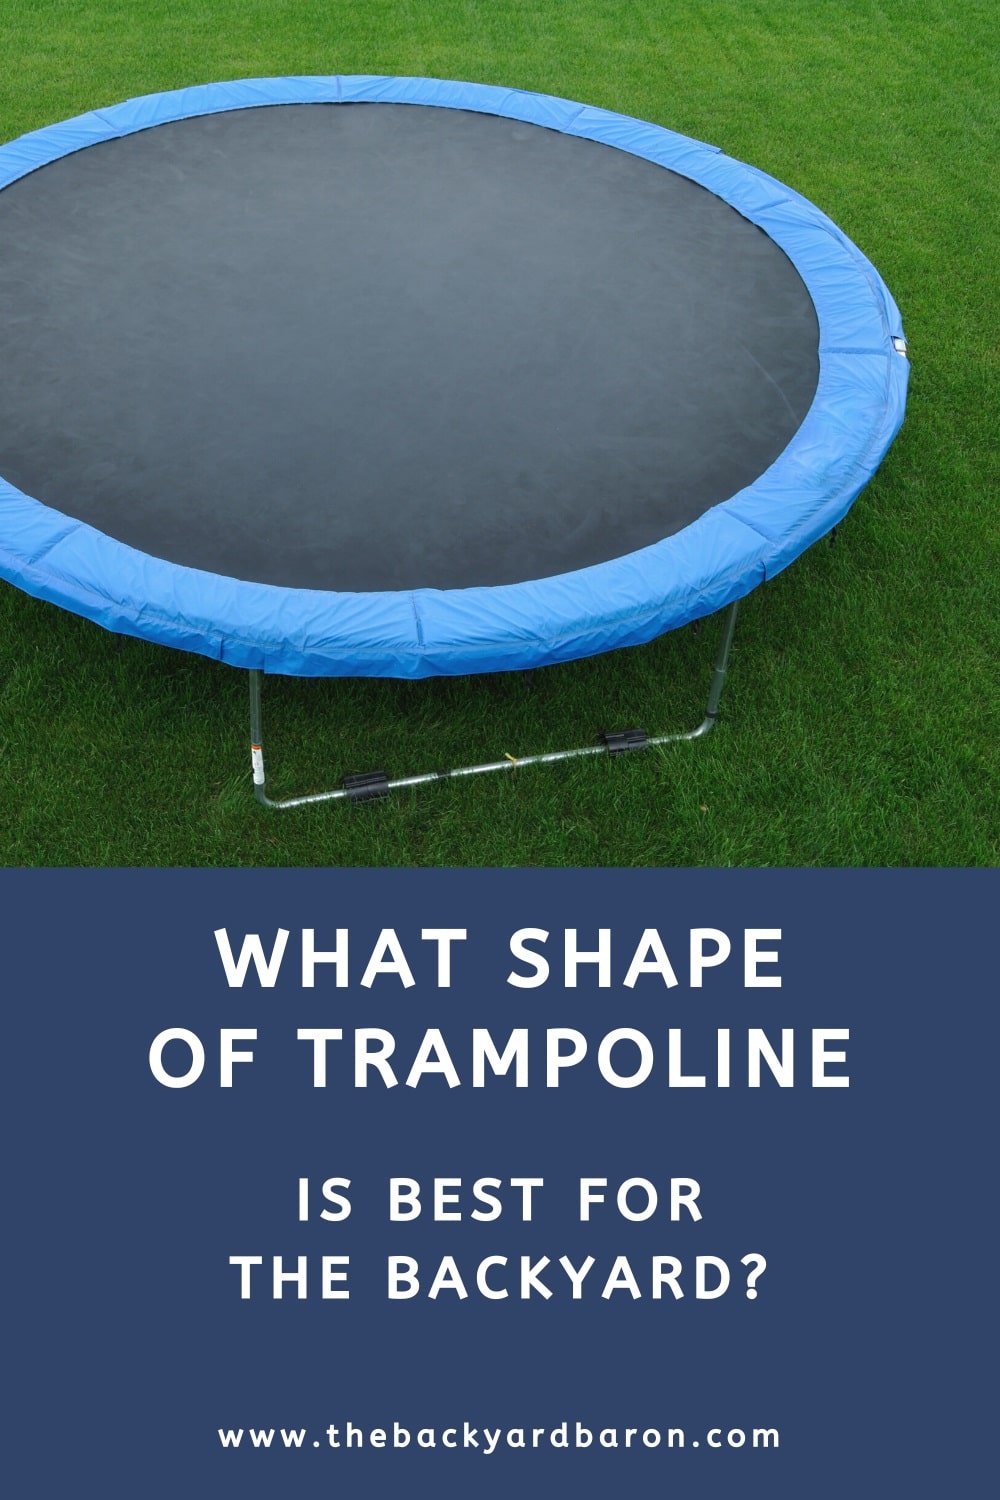 What trampoline shape is best for the backyard?